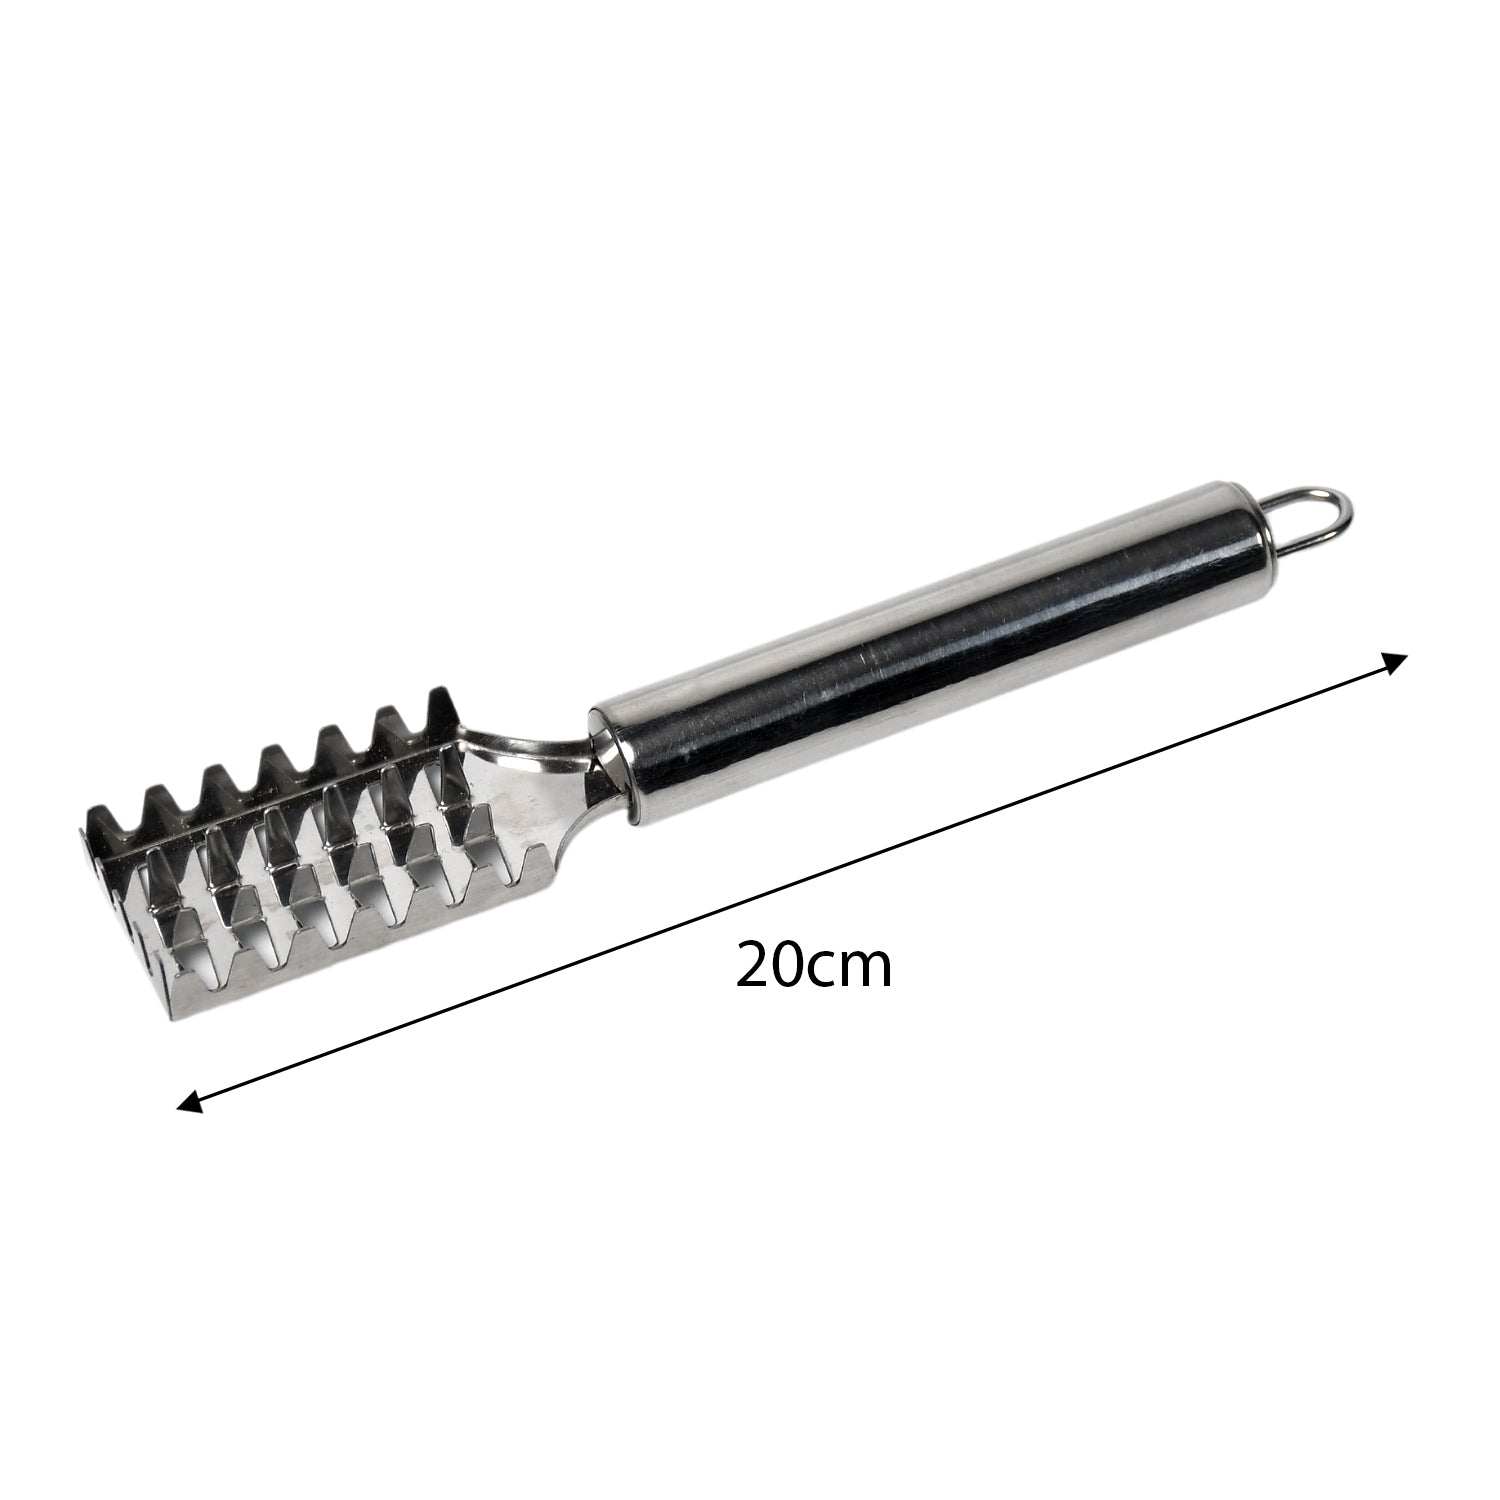 2194 Fish Scale Remover Scraper Stainless Steel Fish Cutting Tools Sawtooth Easily Remove Fish Scales-Cleaning Brush Scraper Kitchen Tool- DeoDap